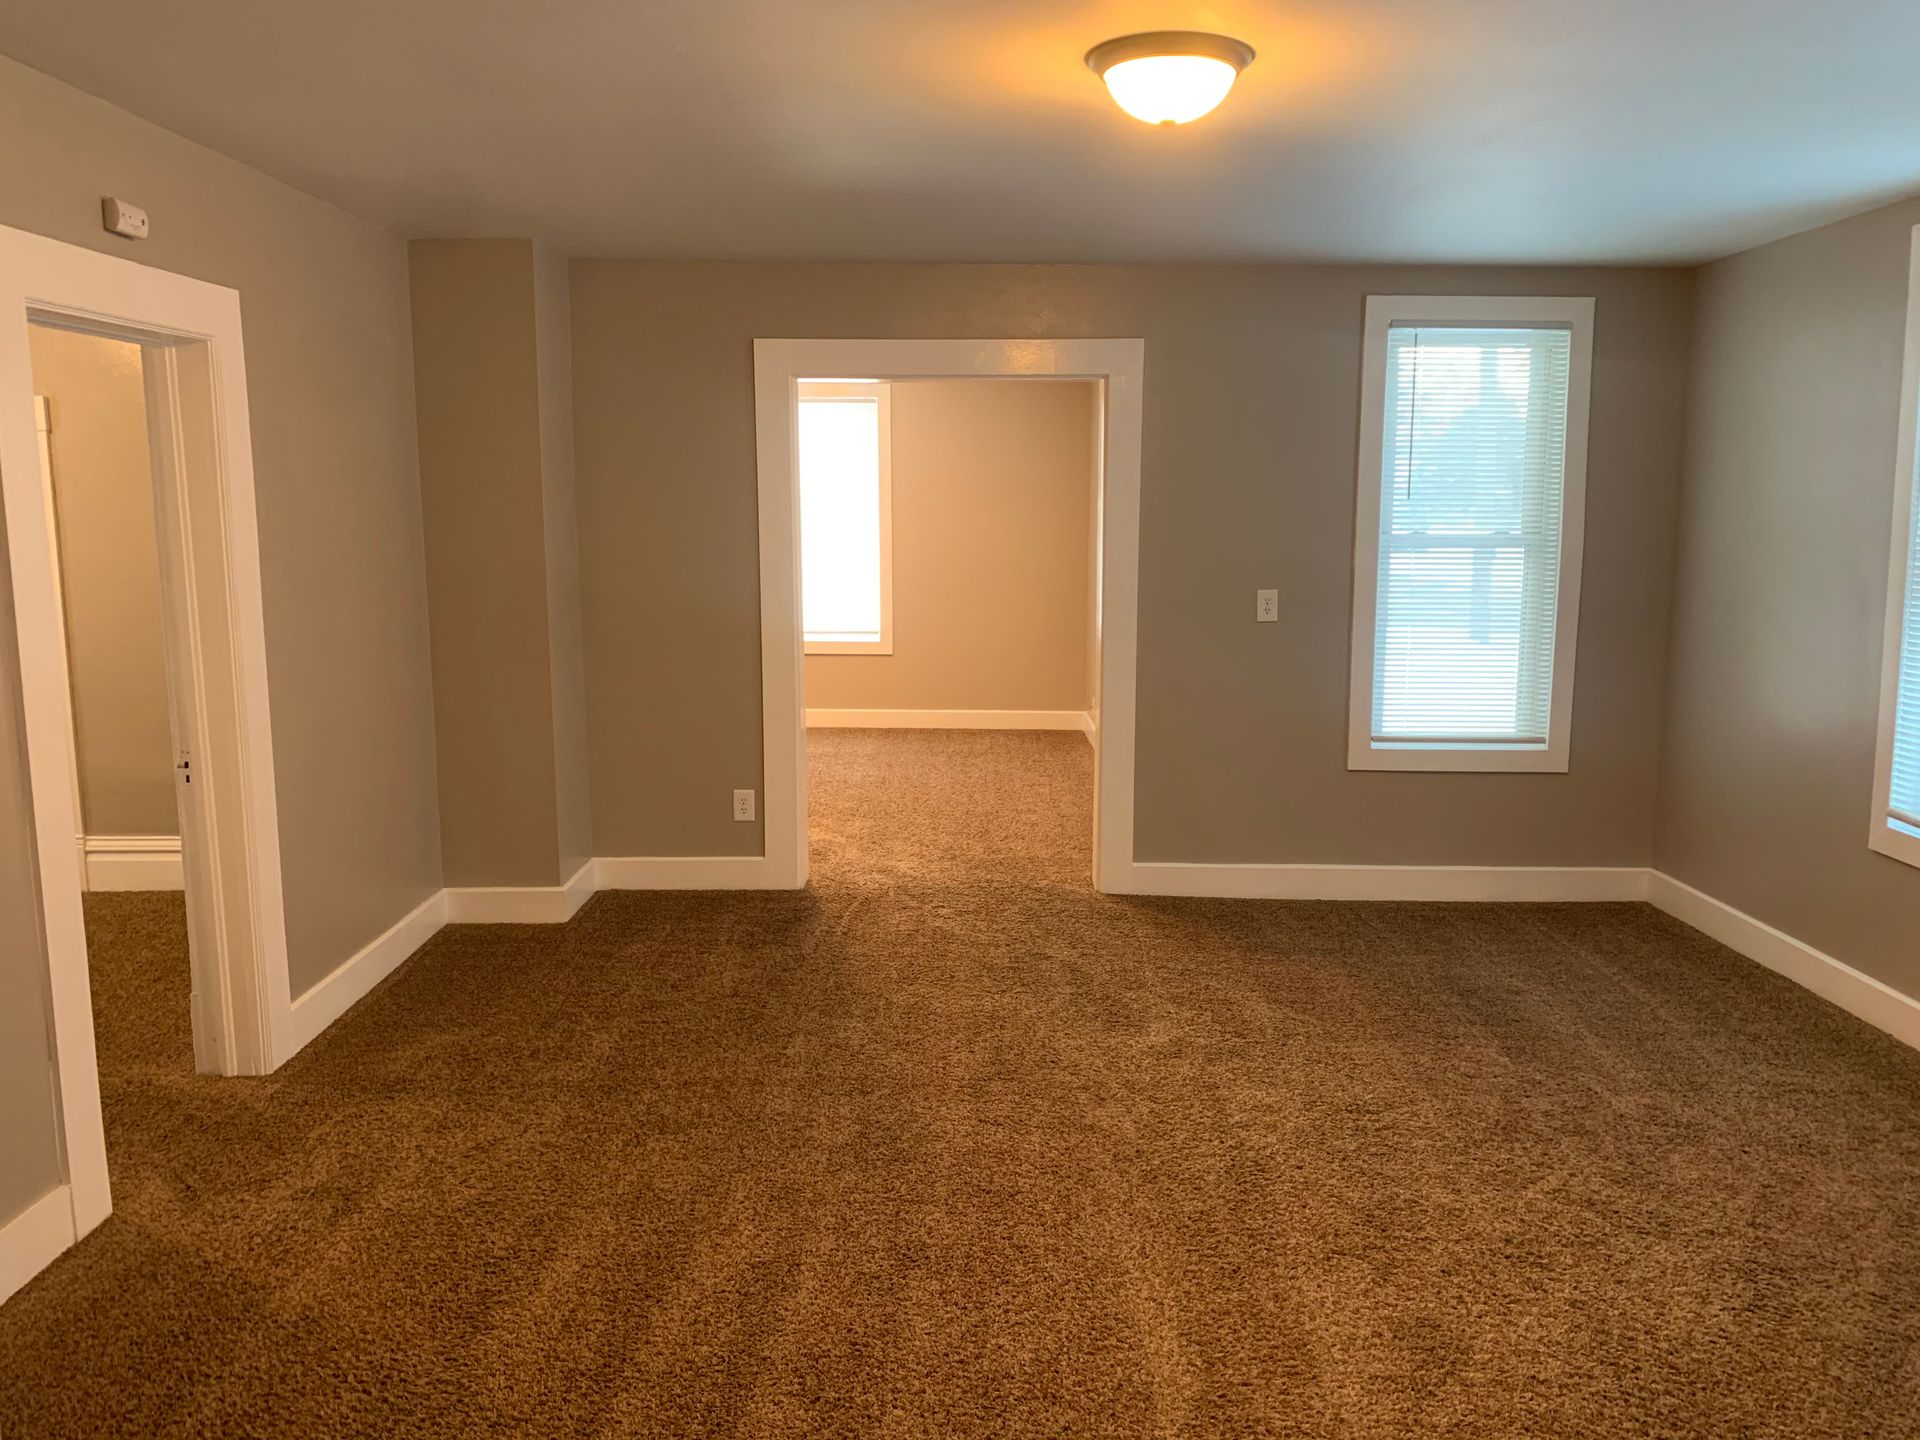 An empty living room with a brown carpet and two windows.